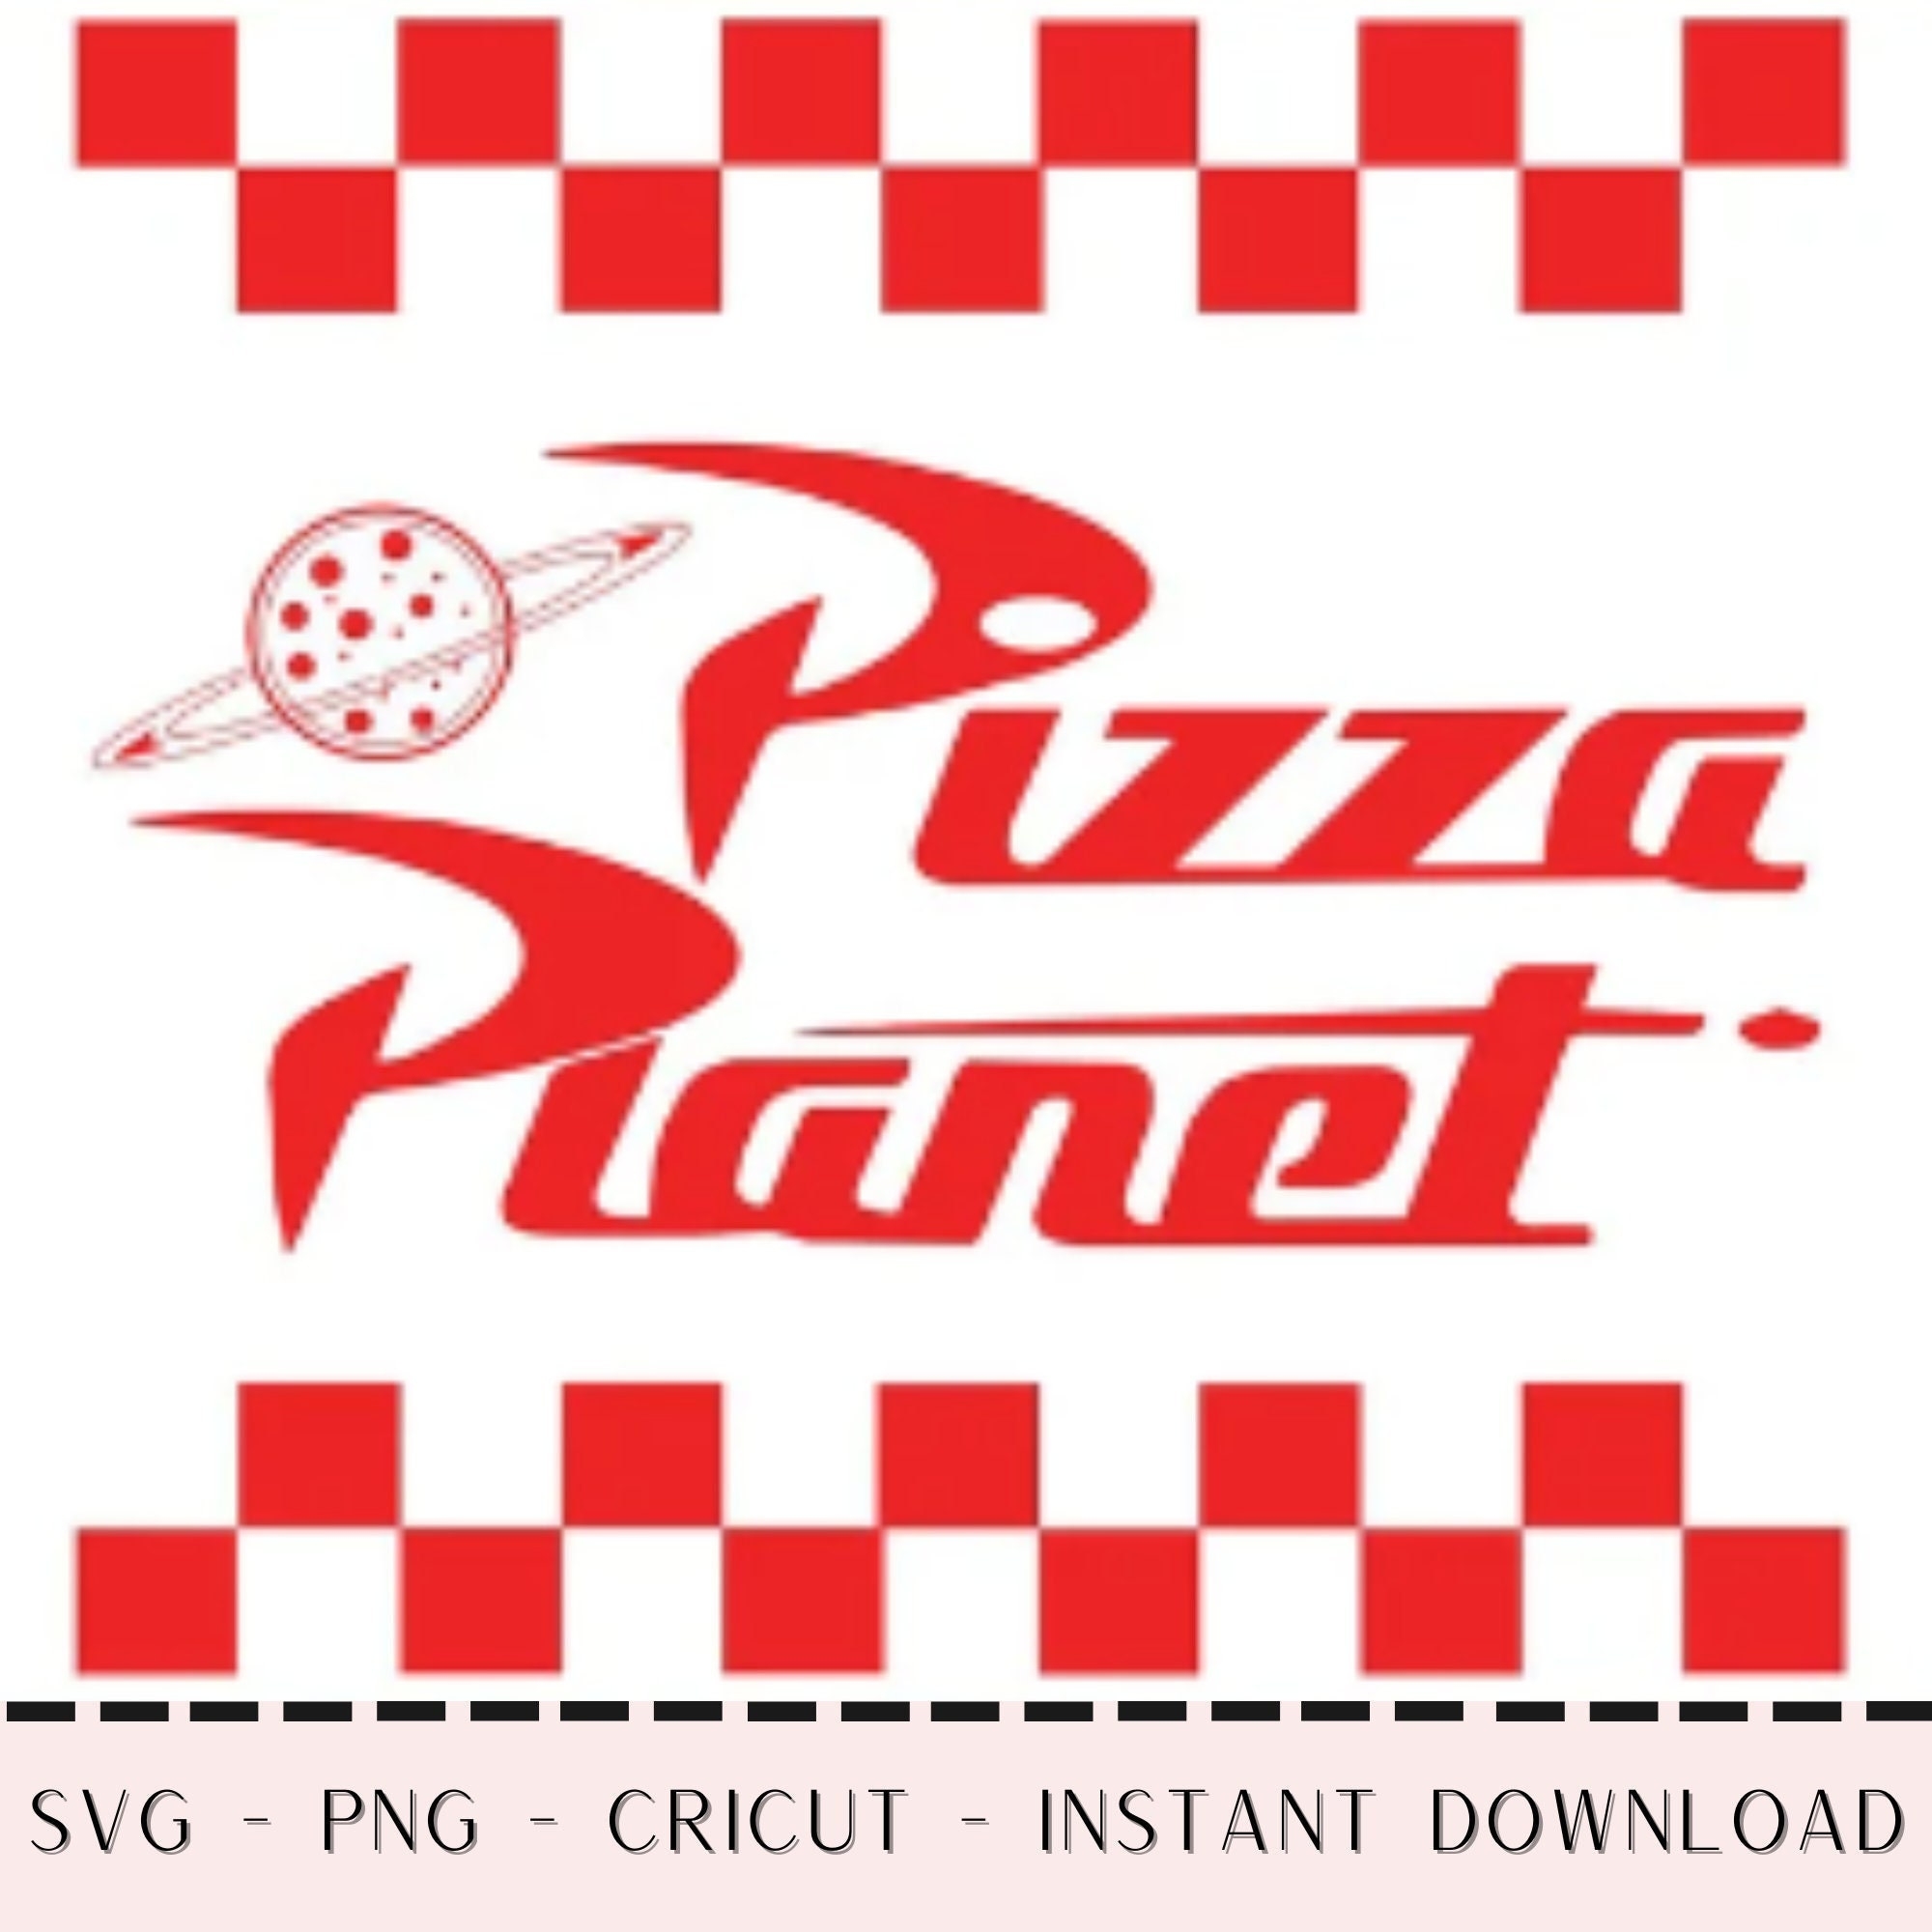 Pizza Planet Downloadable SVG File For Cutting Stencil Template Graphic Image Craft Etsy